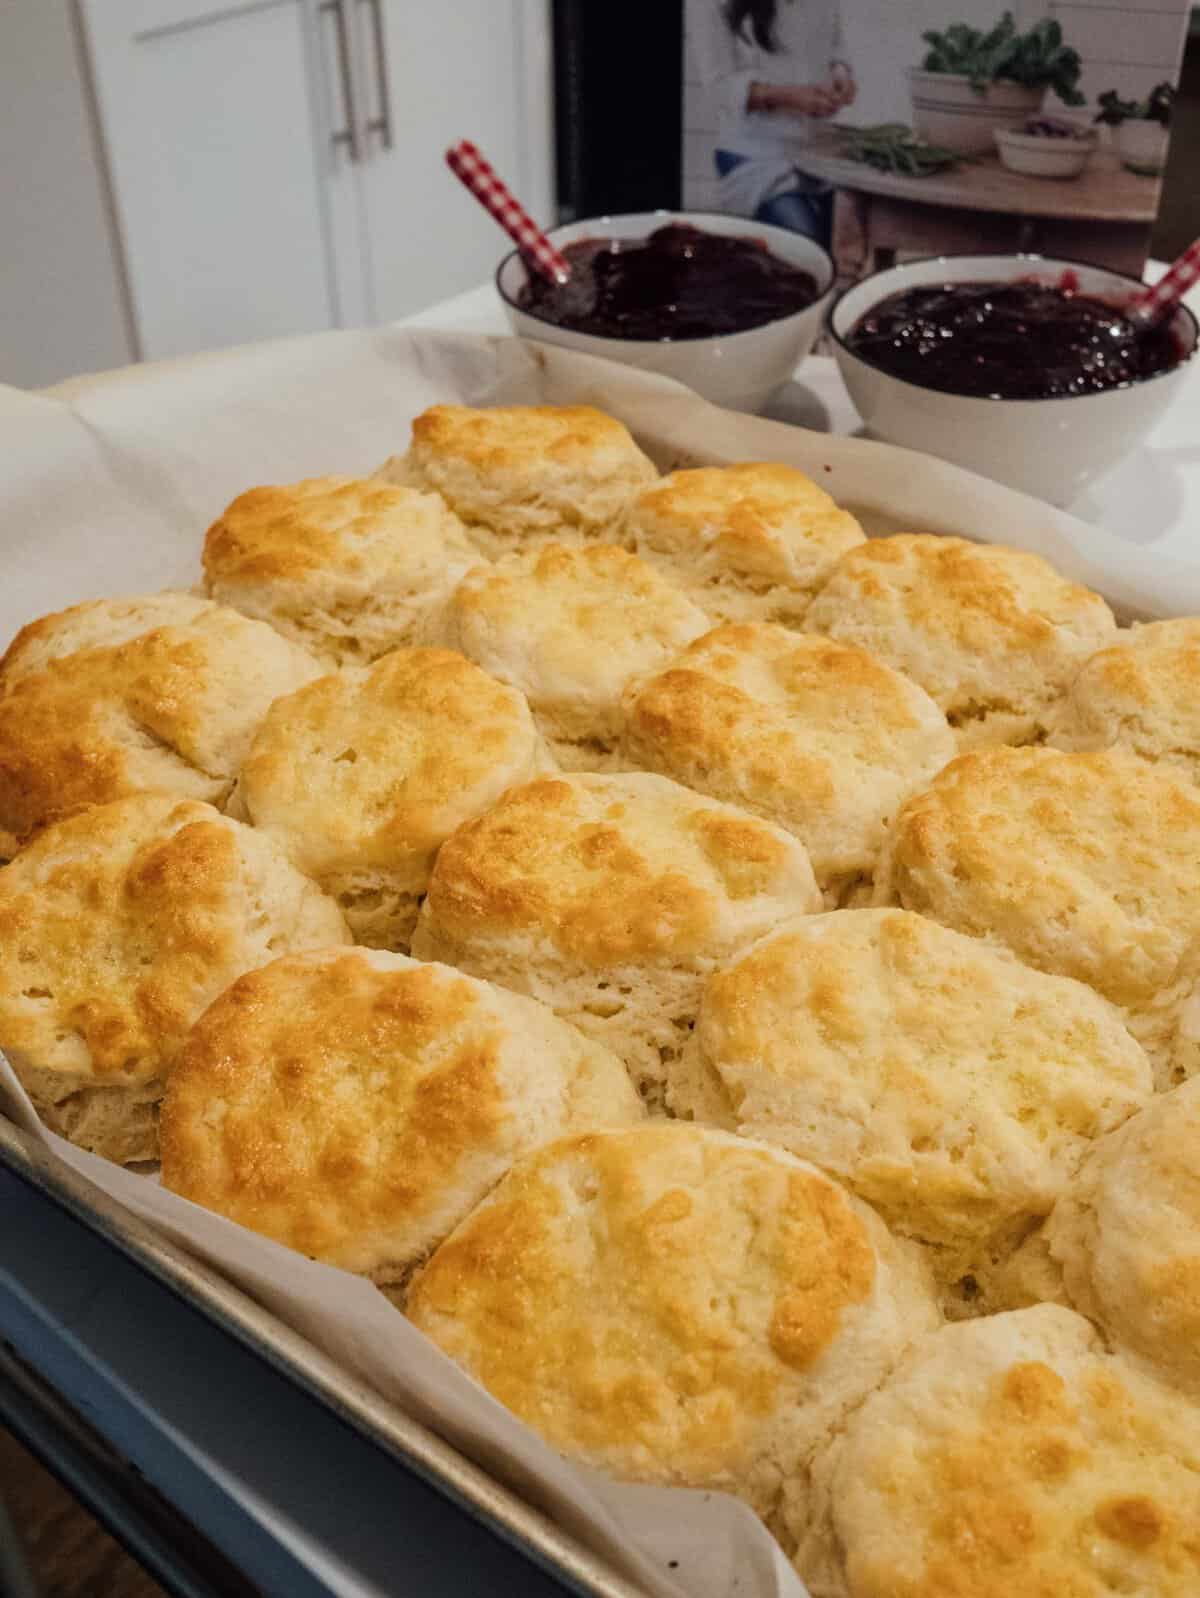 You'll want these biscuits on your breakfast table! They're so fluffy, buttery, and incredibly tender. You won't be able to just eat one!